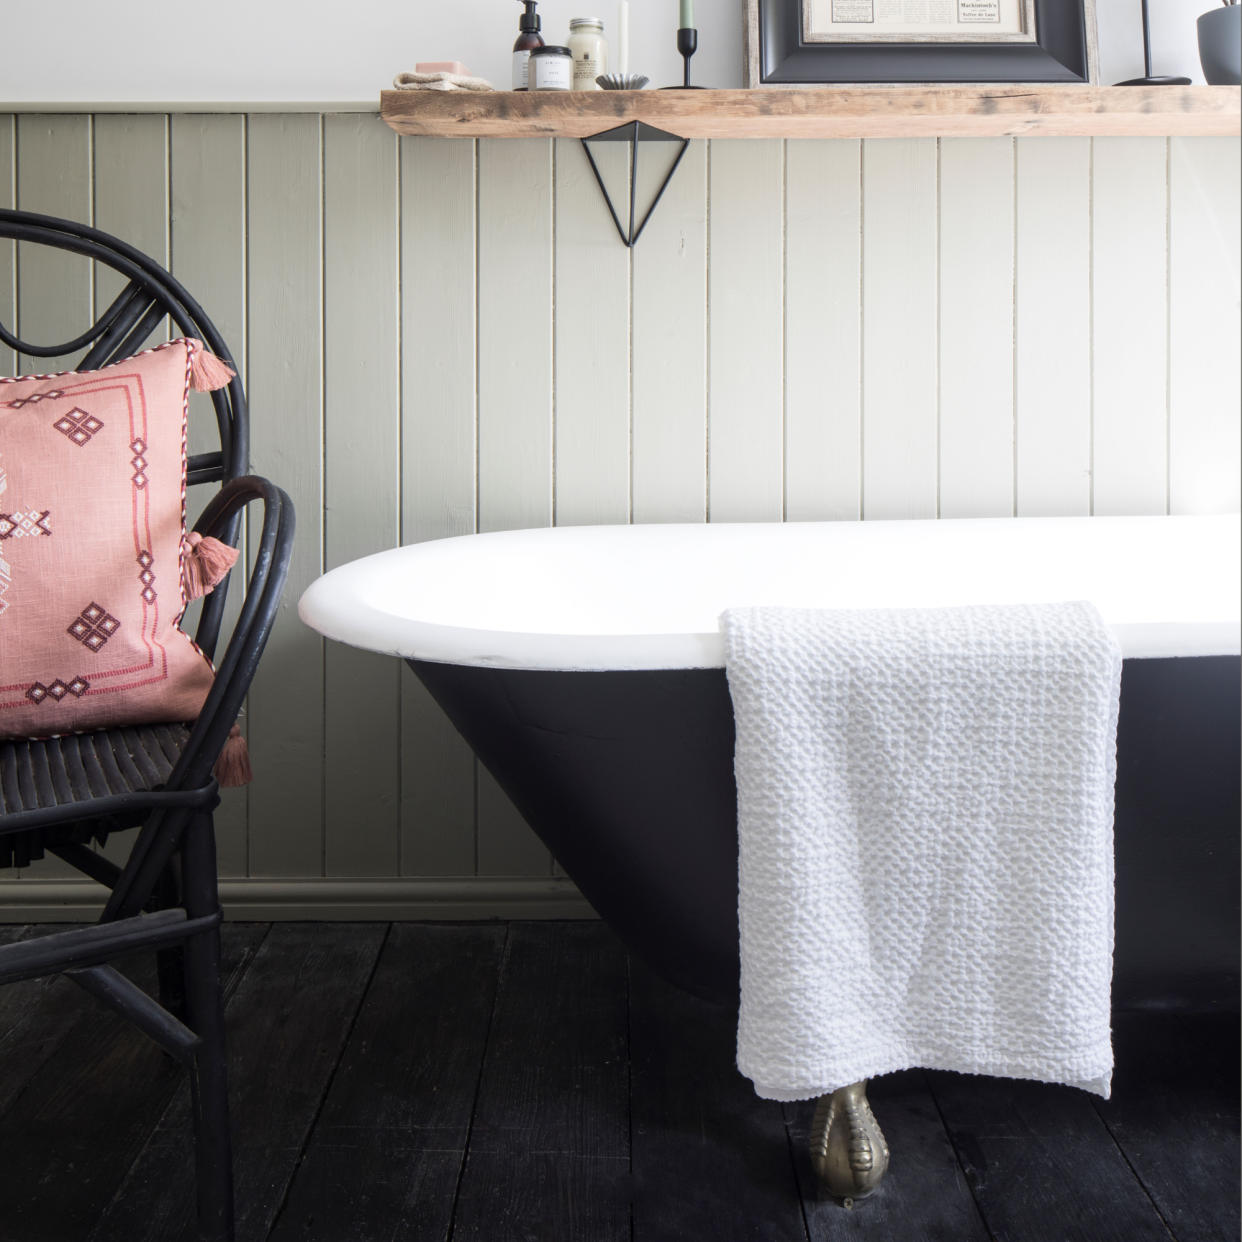  Black bathtub with towel hanging over, black rattan chair with cushion. 